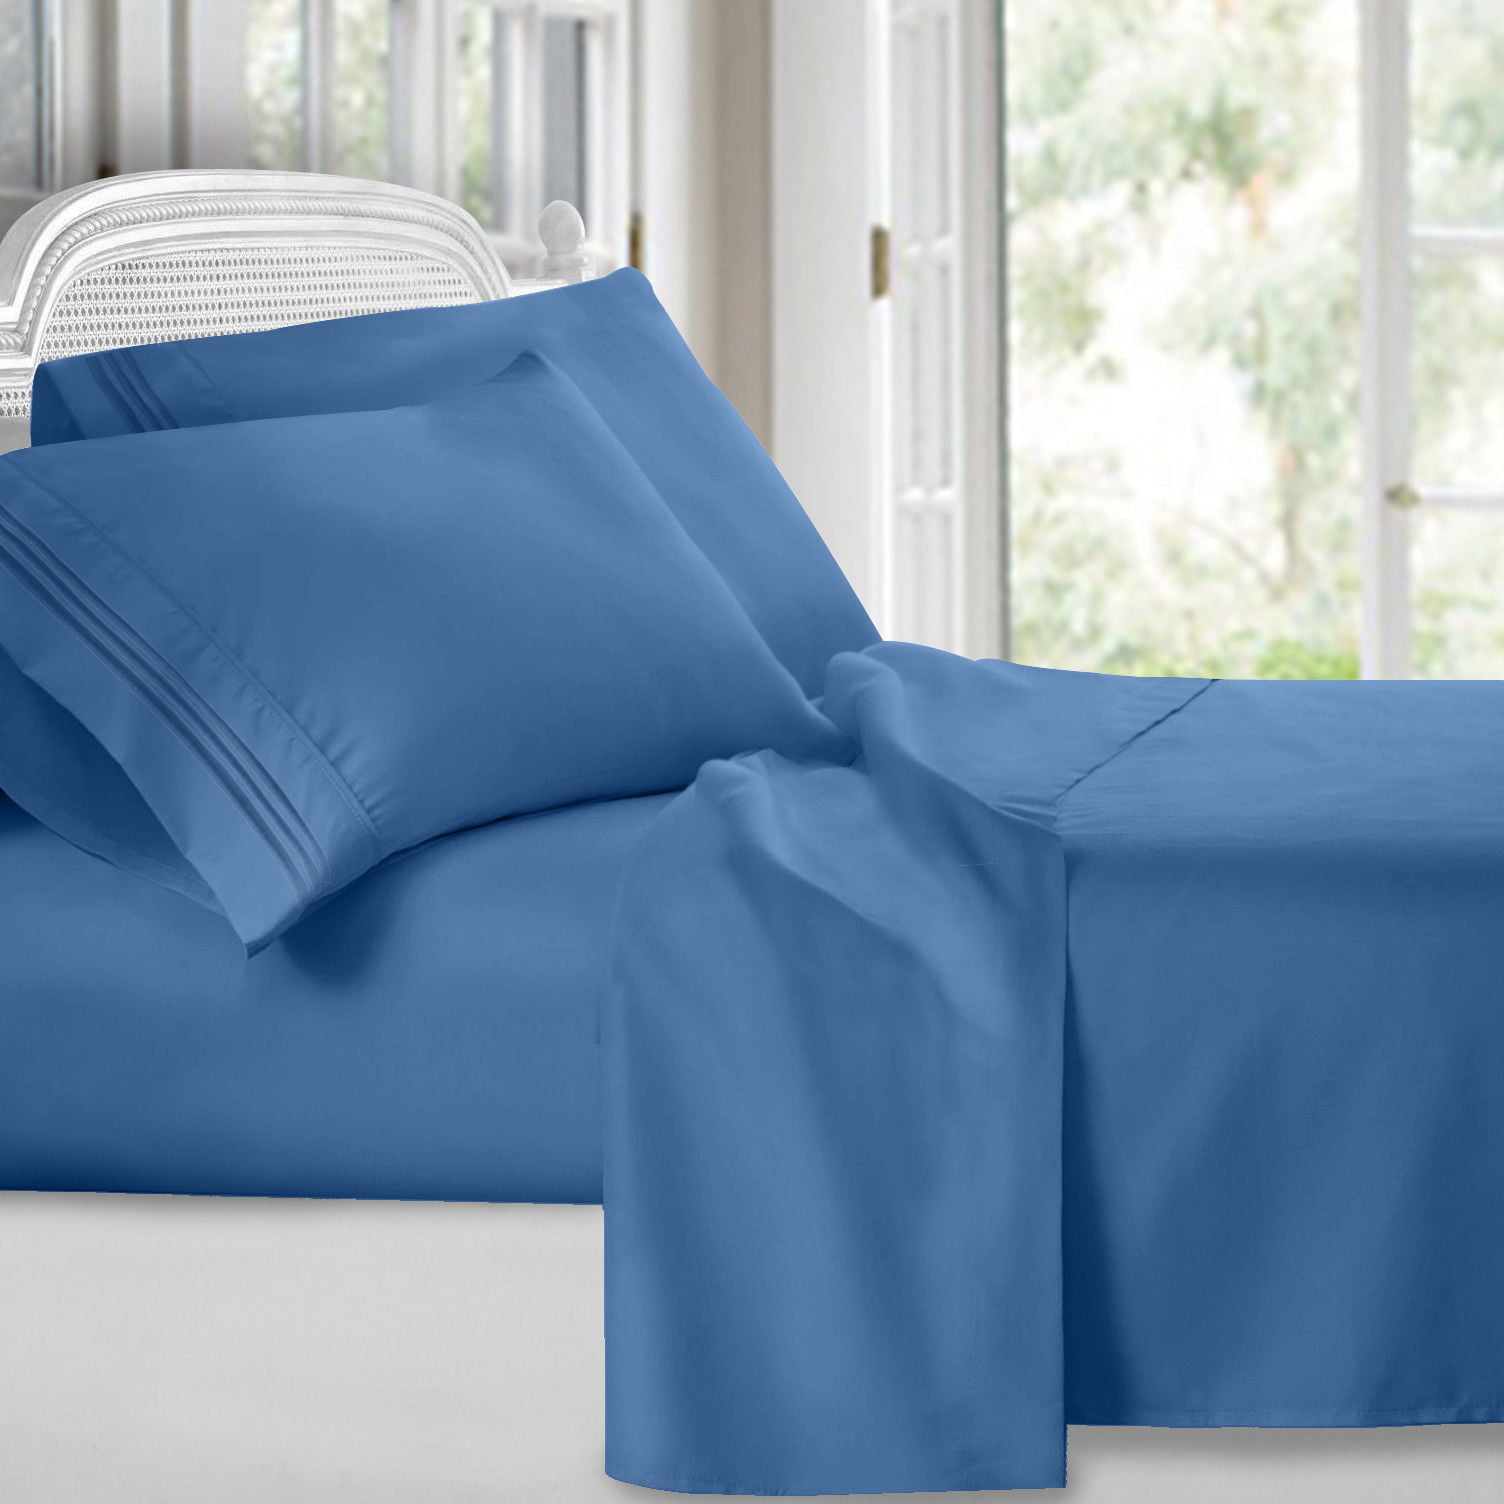 Details about   EGYPTIAN COMFORT 4-PIECE BED SHEET SET DEEP POCKET 1800 COUNT HOTEL BED SHEETS 